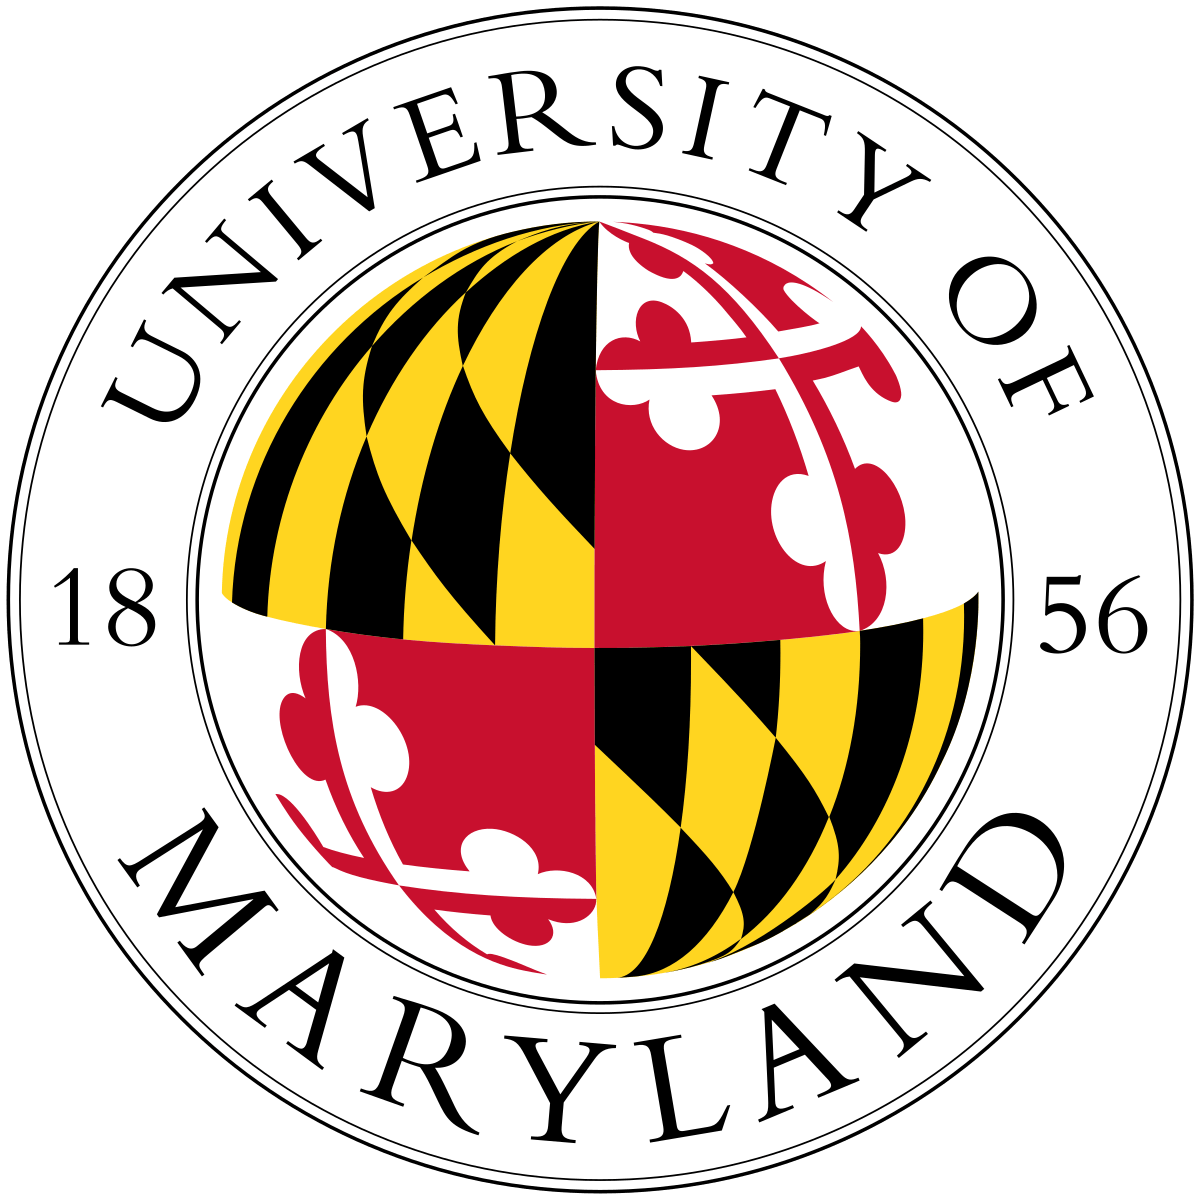 Terps Logo - University of Maryland, College Park